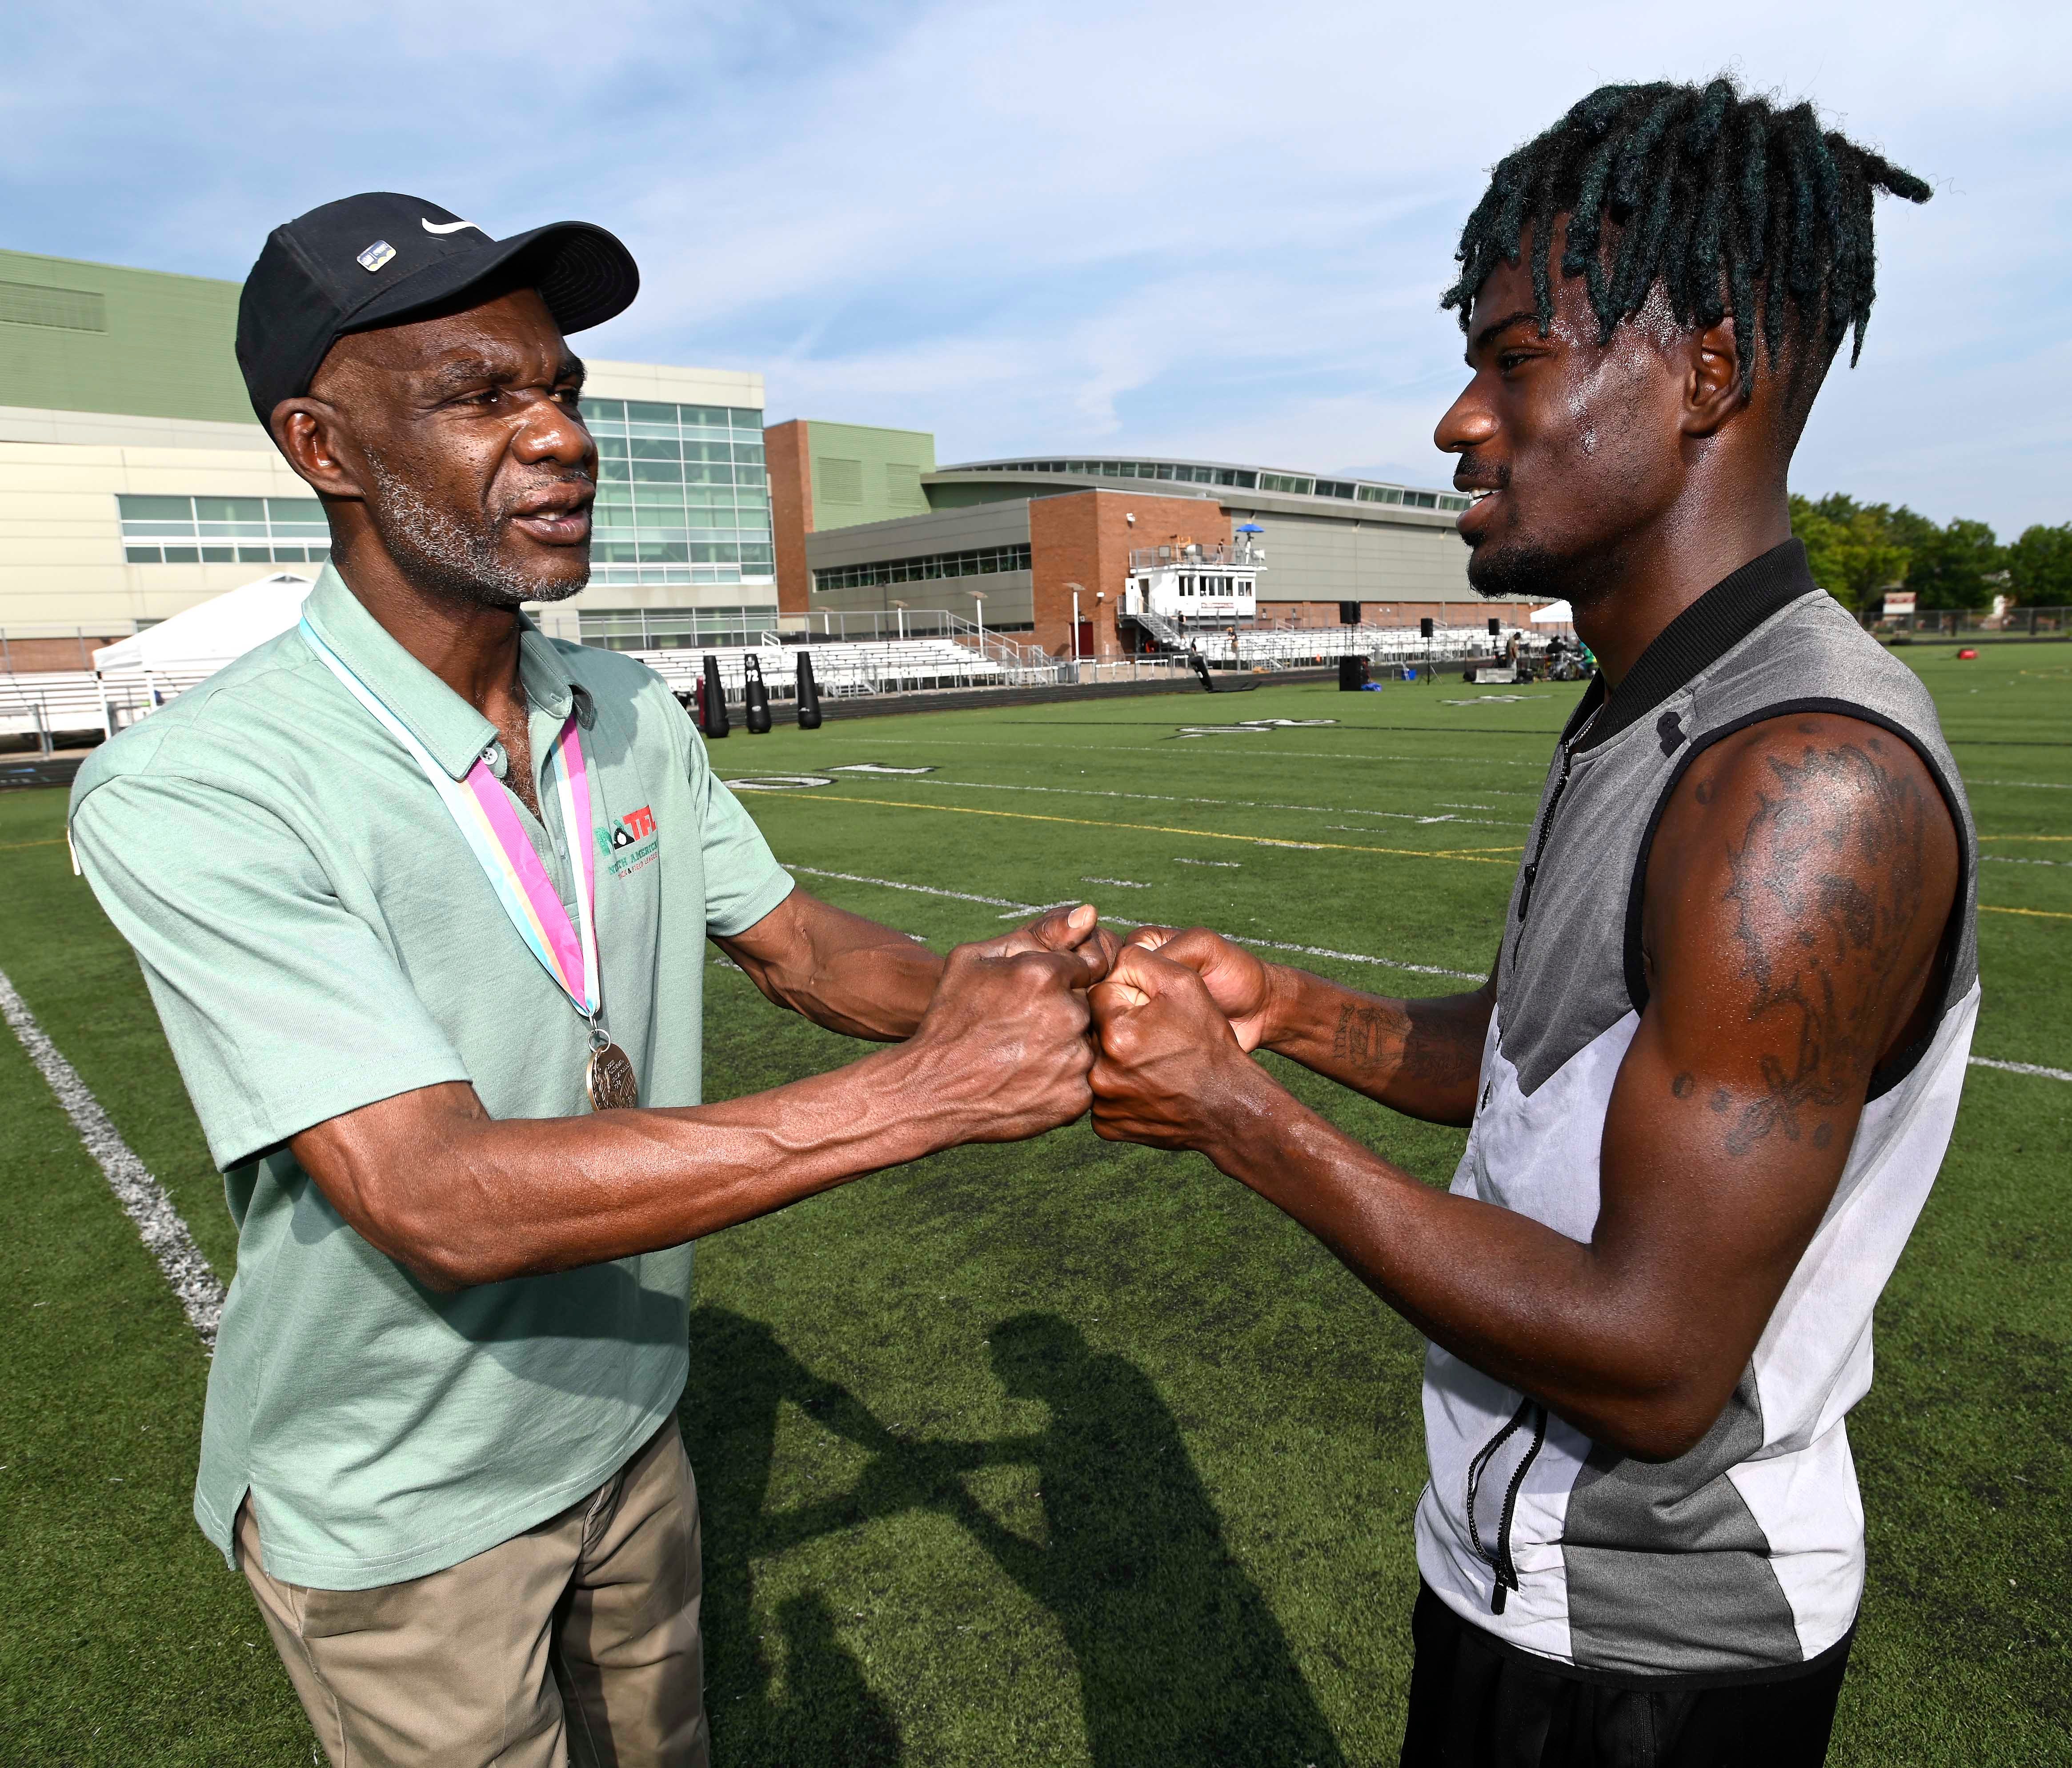 Earl Jones, left, double-fist bumps runner Montel Lewis, 21, of Detroit, on Saturday morning at a meet at Detroit Renaissance. Jones won a bronze medal in the 800-meter run in the 1984 Olympics.